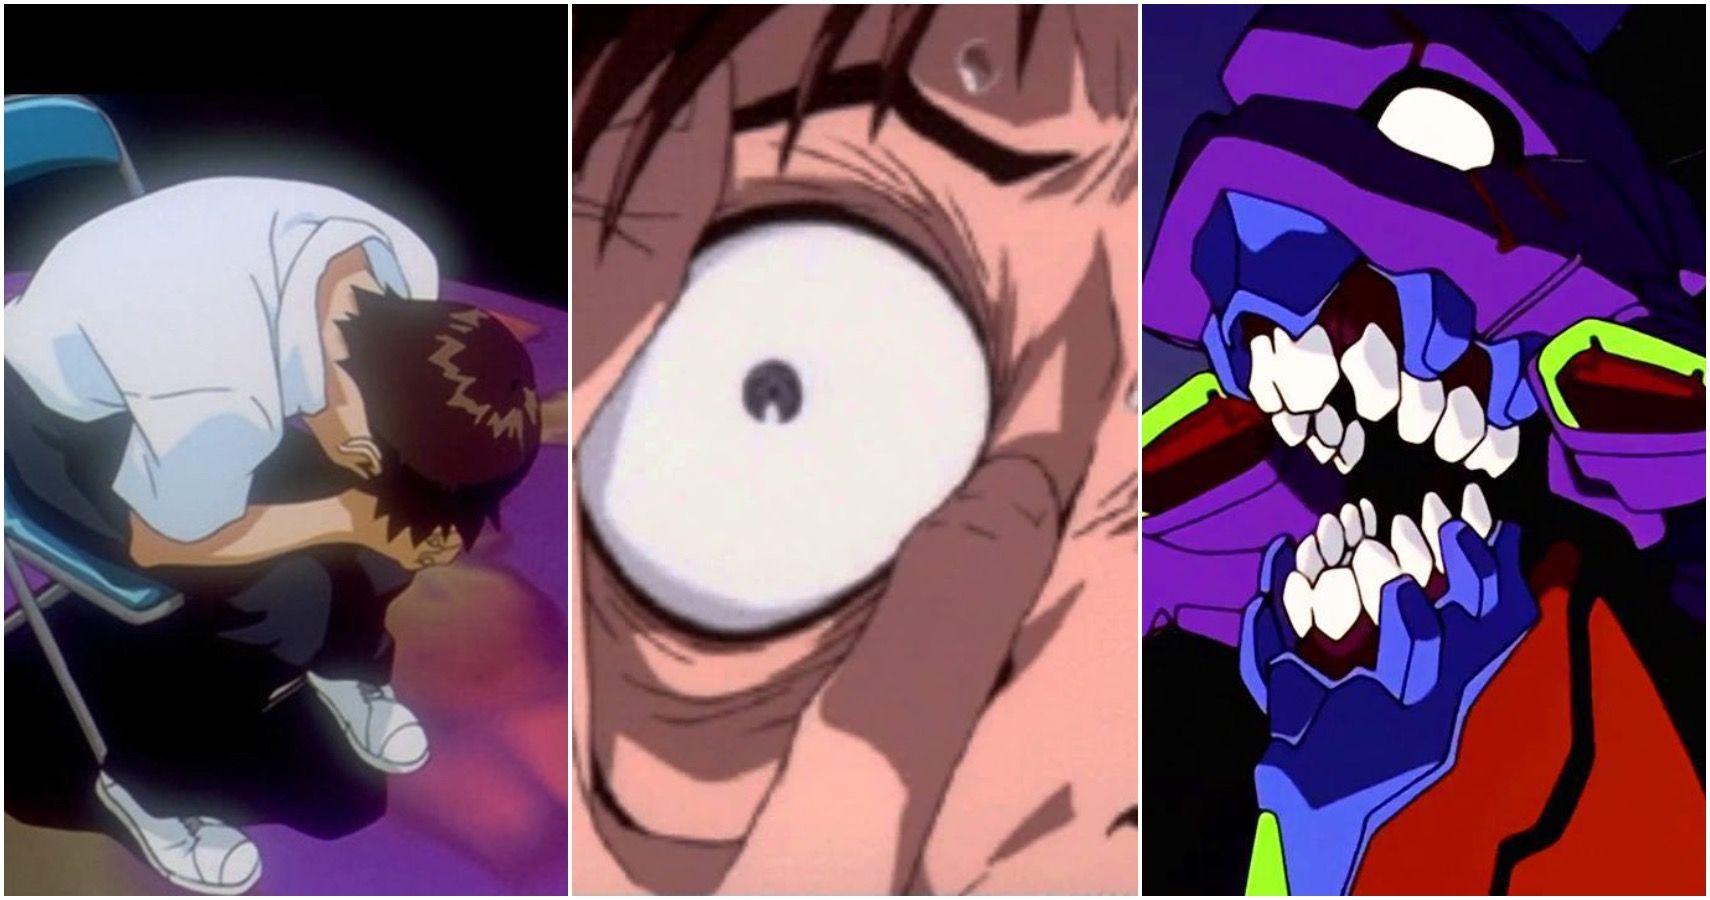 Neon Genesis Evangelion anime on Netflix reflects our lives